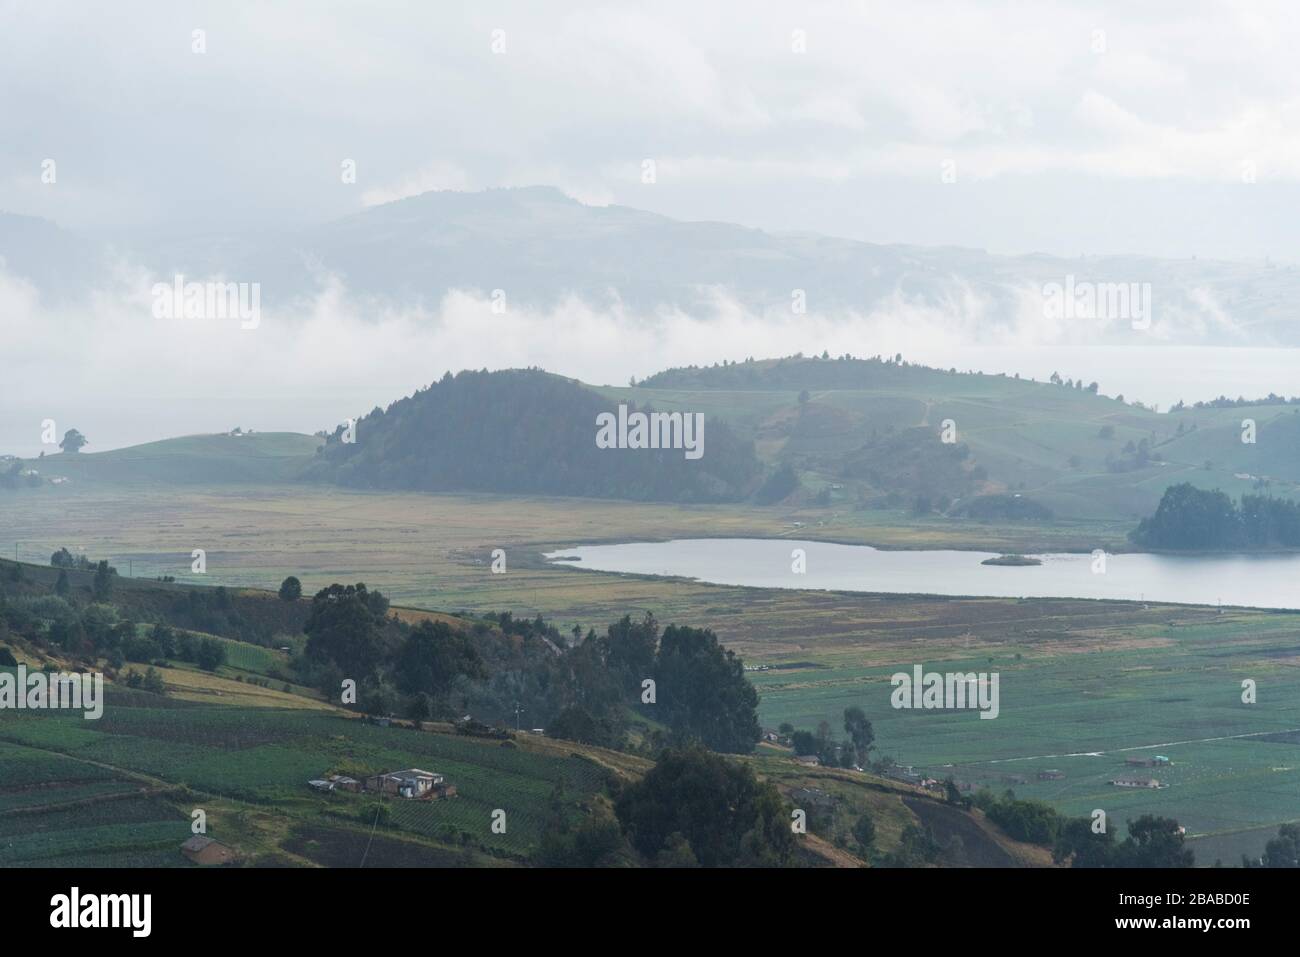 Misty Andean landscape: Tota, the largest lake in Colombia, a cold and cloudy day, before the rain Stock Photo